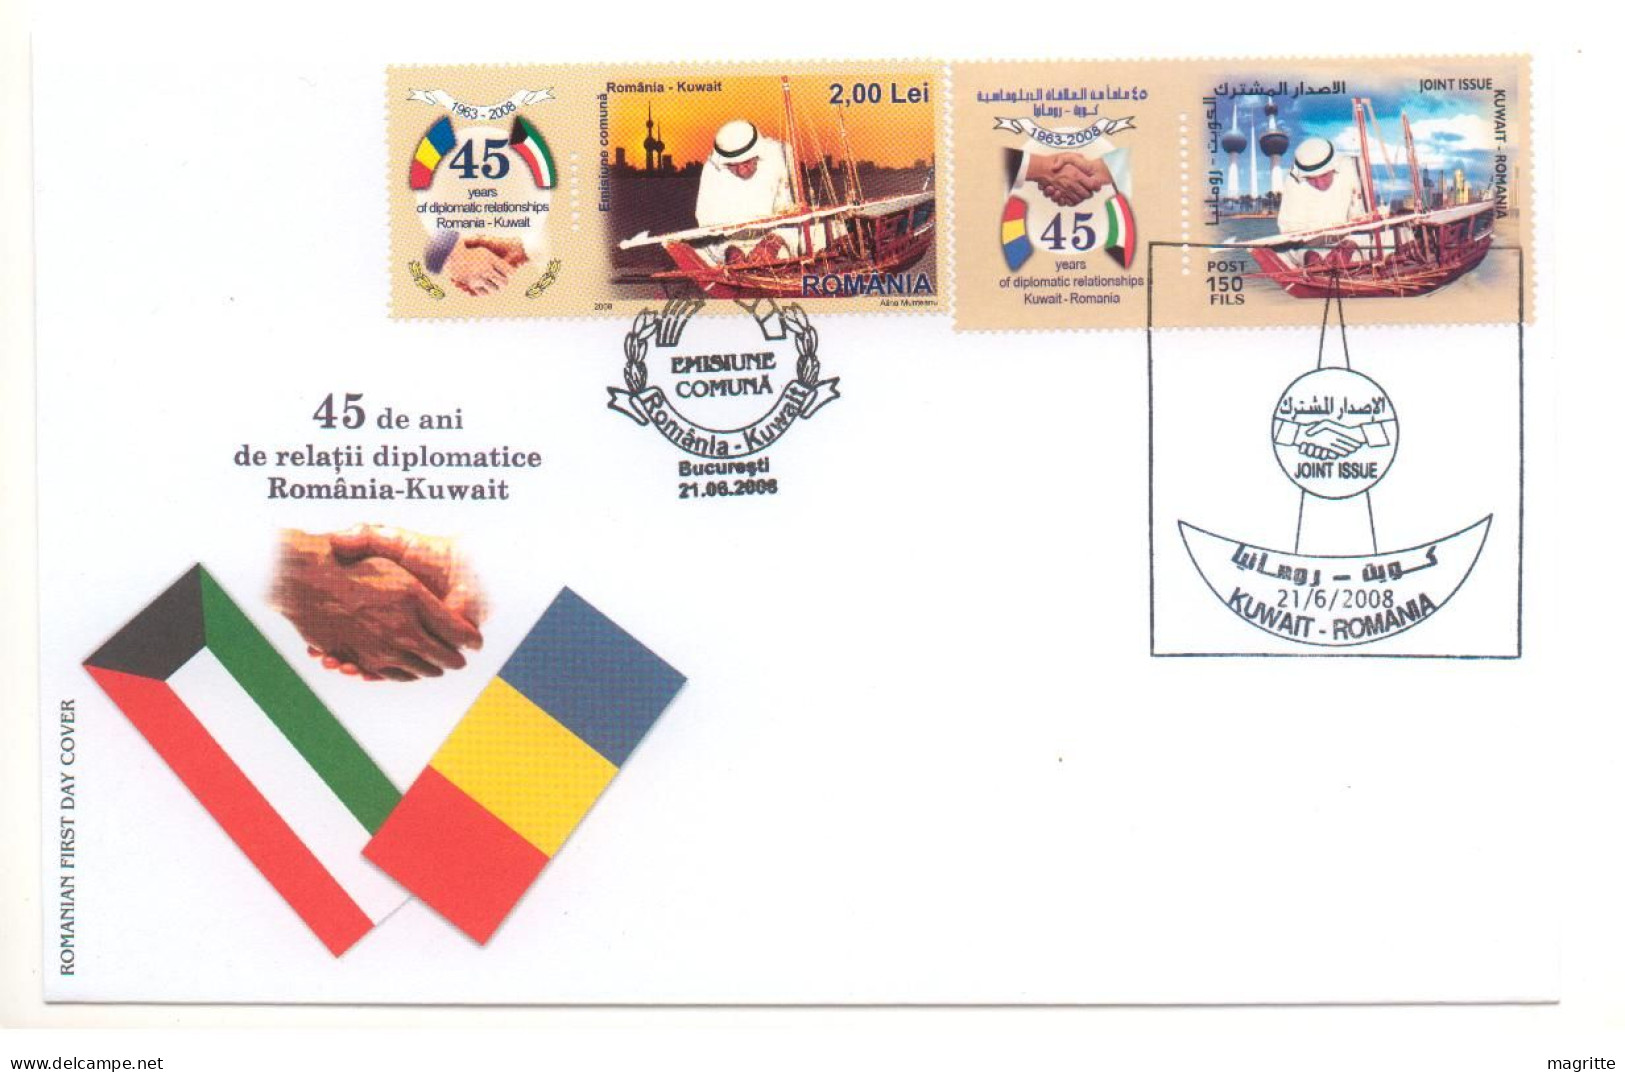 Roumanie Koweit 2008 FDC's Mixtes Emission Commune Romania Kuwait Joint Issue Mixed FDC 's Diplomatic Relationship - Emisiones Comunes